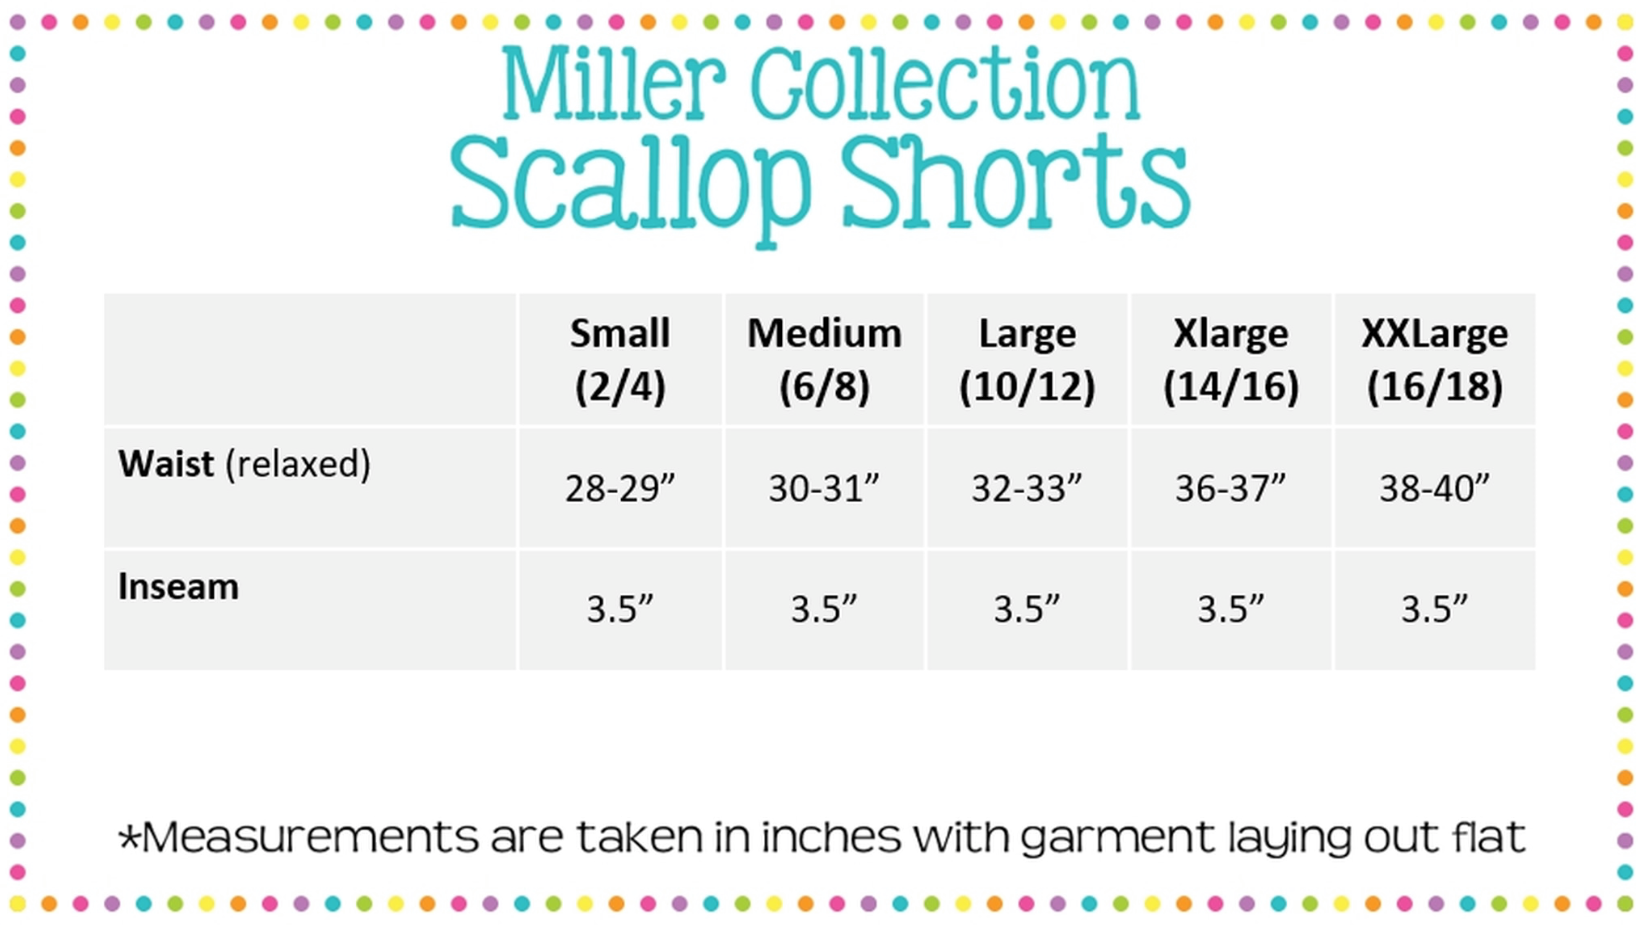 Miller Collection: Scallop Shorts